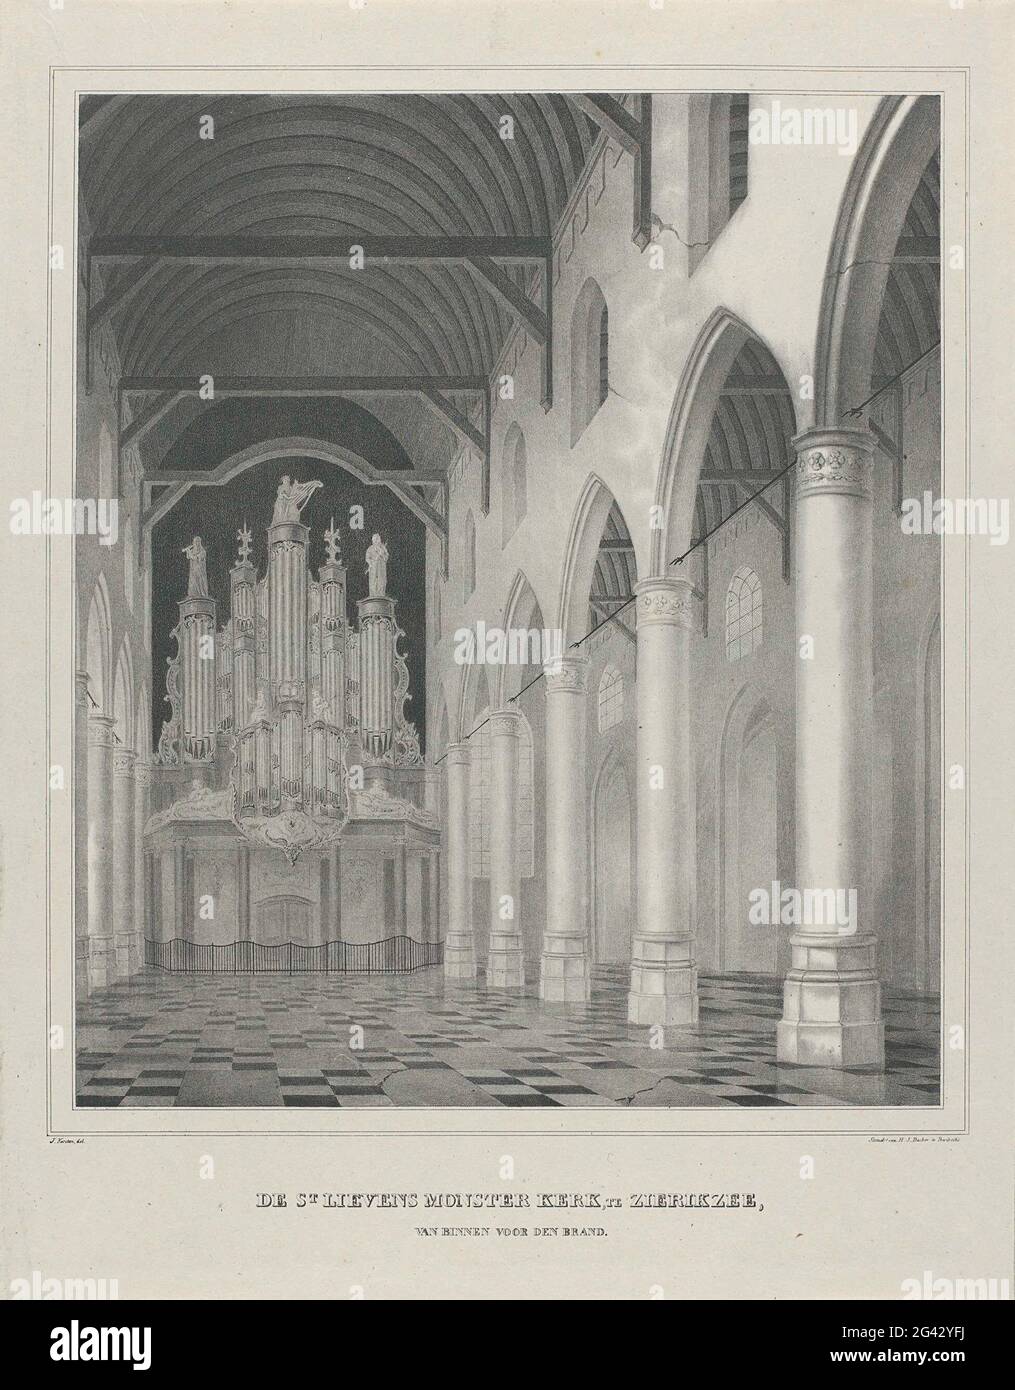 Interior of the Sint-Lievensmonsterkerk in Zierikzee, before the fire of 1832; The St Lievens Monster Church, in Zierikzee, from the inside for the fire. Interior of the Sint-Lievensmonsterkerk in Zierikzee, in welfare, before the fire of 6 October 1832. View in the interior to the organ. See also the pendant with the ruins of the church after the fire. Stock Photo